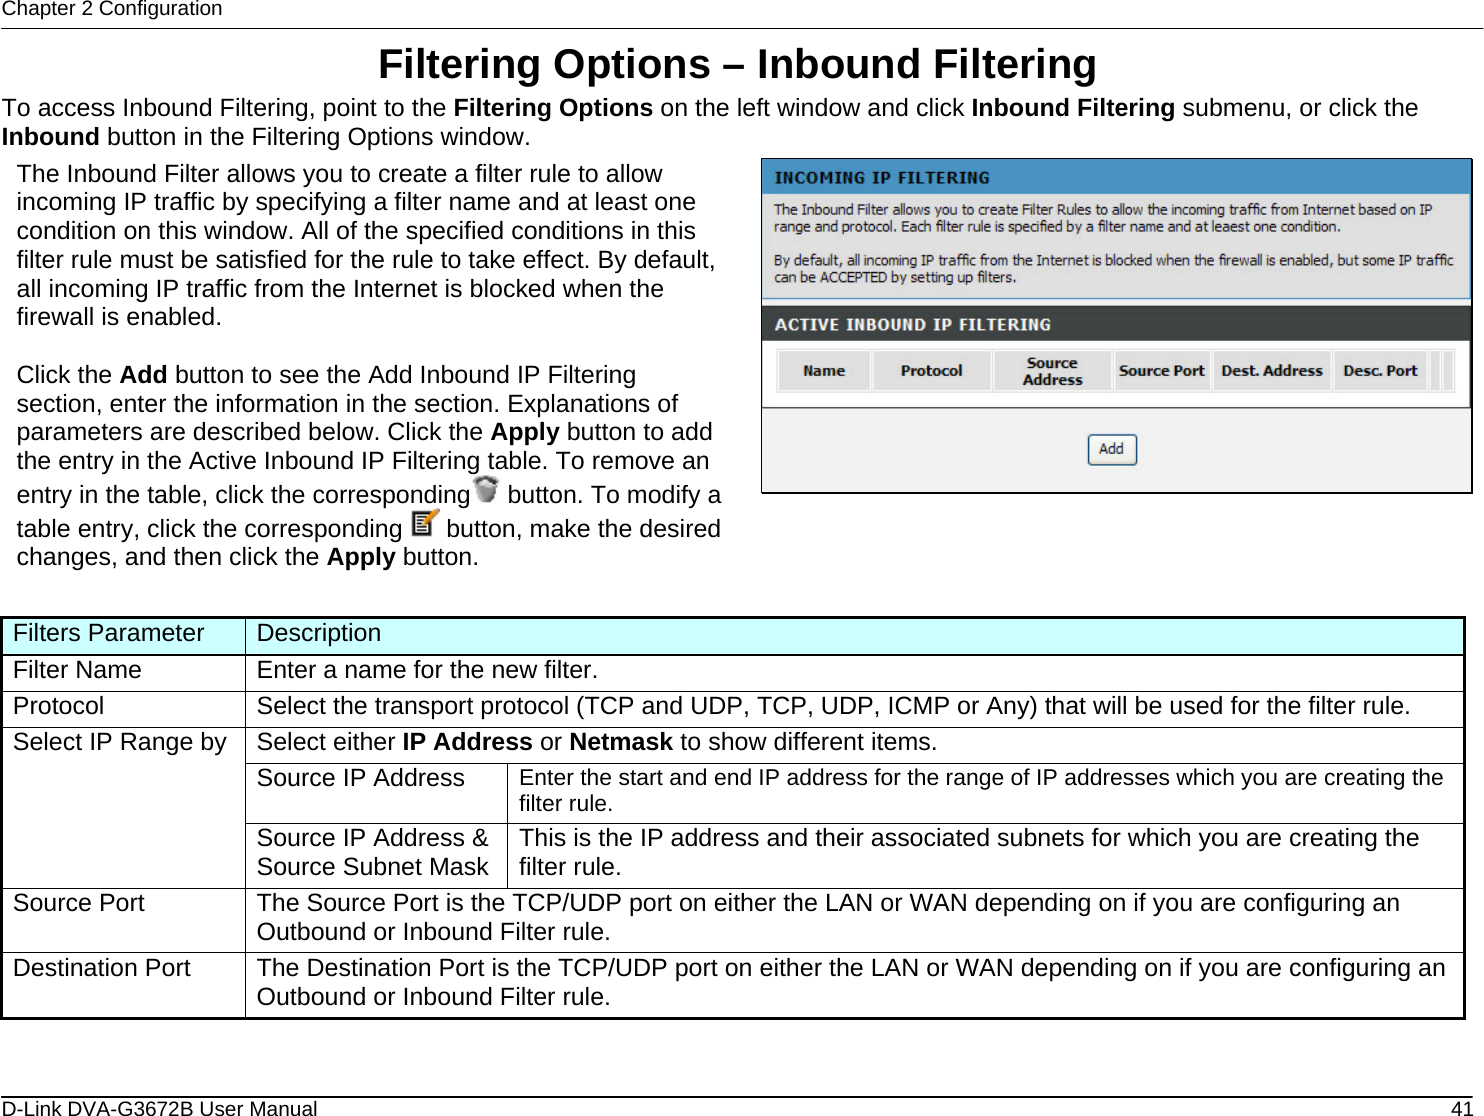 Chapter 2 Configuration Filtering Options – Inbound Filtering To access Inbound Filtering, point to the Filtering Options on the left window and click Inbound Filtering submenu, or click the Inbound button in the Filtering Options window. The Inbound Filter allows you to create a filter rule to allow incoming IP traffic by specifying a filter name and at least one condition on this window. All of the specified conditions in this filter rule must be satisfied for the rule to take effect. By default, all incoming IP traffic from the Internet is blocked when the firewall is enabled.  Click the Add button to see the Add Inbound IP Filtering section, enter the information in the section. Explanations of parameters are described below. Click the Apply button to add the entry in the Active Inbound IP Filtering table. To remove an entry in the table, click the corresponding button. To modify a table entry, click the corresponding   button, make the desired changes, and then click the Apply button.      Filters Parameter  Description Filter Name  Enter a name for the new filter. Protocol  Select the transport protocol (TCP and UDP, TCP, UDP, ICMP or Any) that will be used for the filter rule. Select either IP Address or Netmask to show different items. Source IP Address  Enter the start and end IP address for the range of IP addresses which you are creating the filter rule. Select IP Range by Source IP Address &amp; Source Subnet Mask This is the IP address and their associated subnets for which you are creating the filter rule. Source Port  The Source Port is the TCP/UDP port on either the LAN or WAN depending on if you are configuring an Outbound or Inbound Filter rule. Destination Port  The Destination Port is the TCP/UDP port on either the LAN or WAN depending on if you are configuring an Outbound or Inbound Filter rule.  D-Link DVA-G3672B User Manual  41